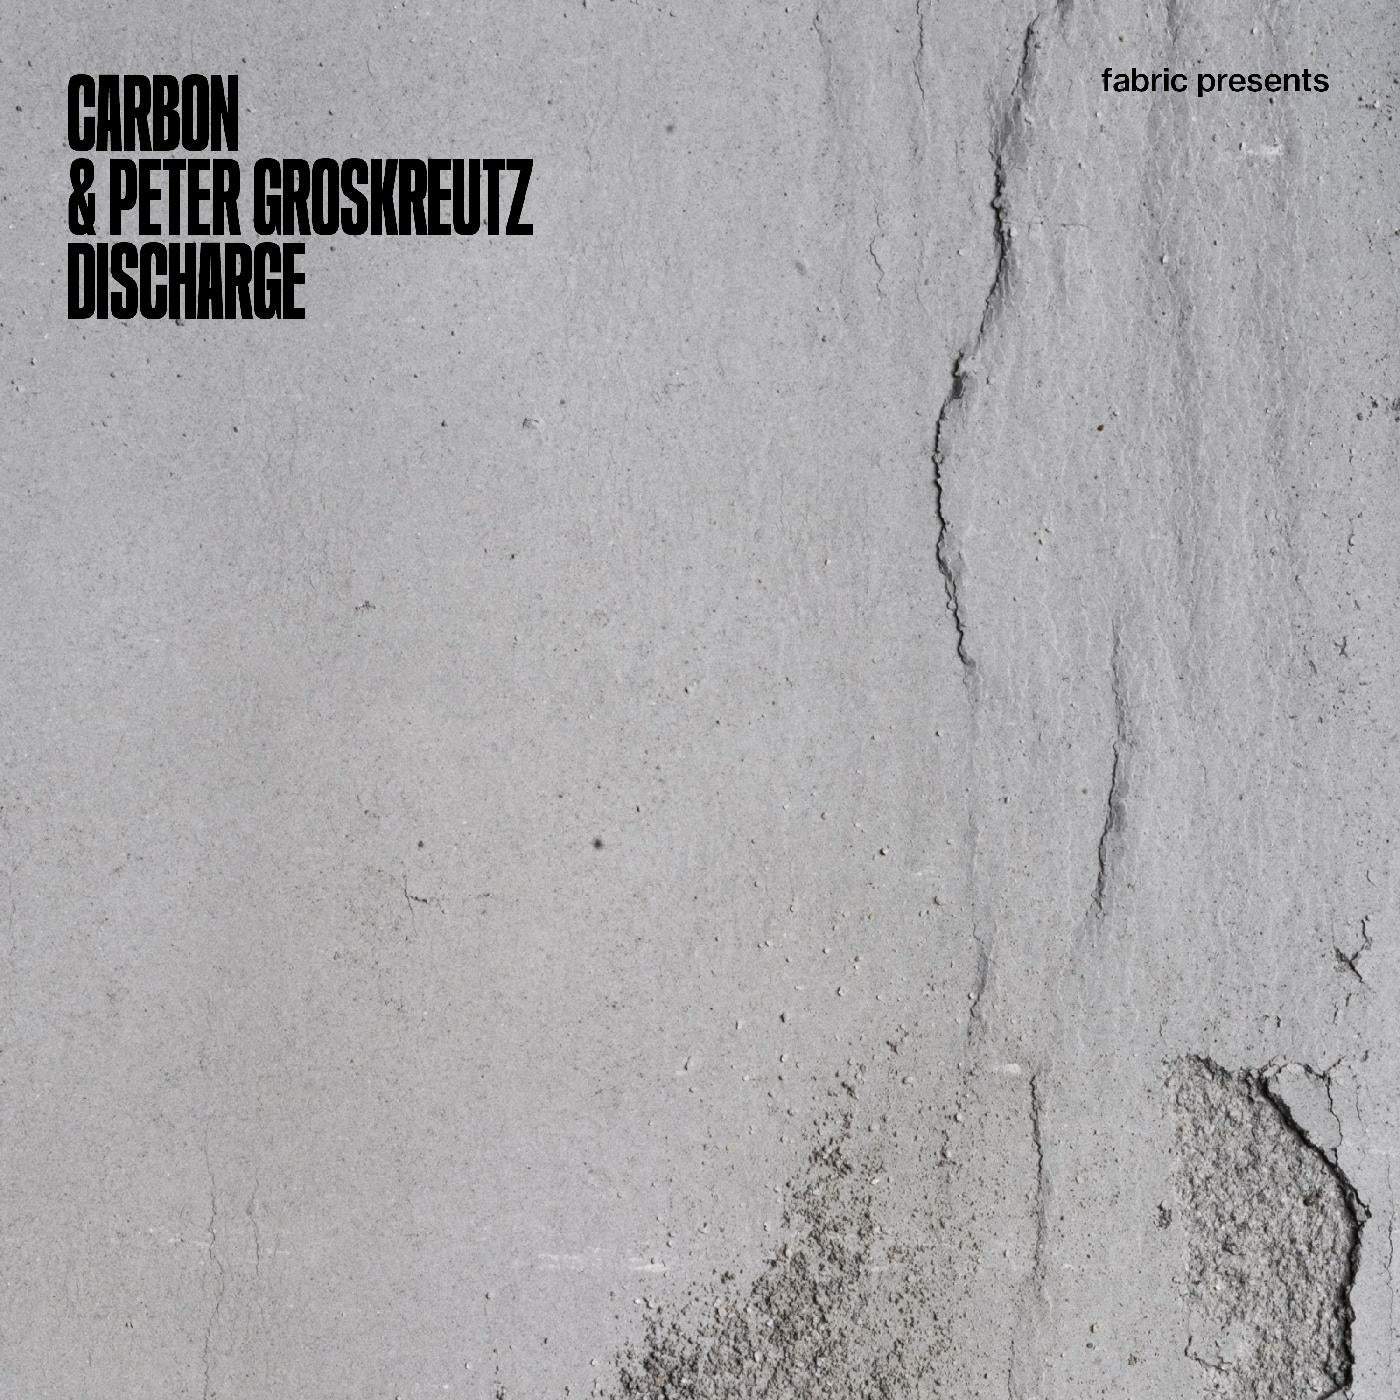 image cover: Carbon, Peter Groskreutz - Discharge on fabric Records (US)